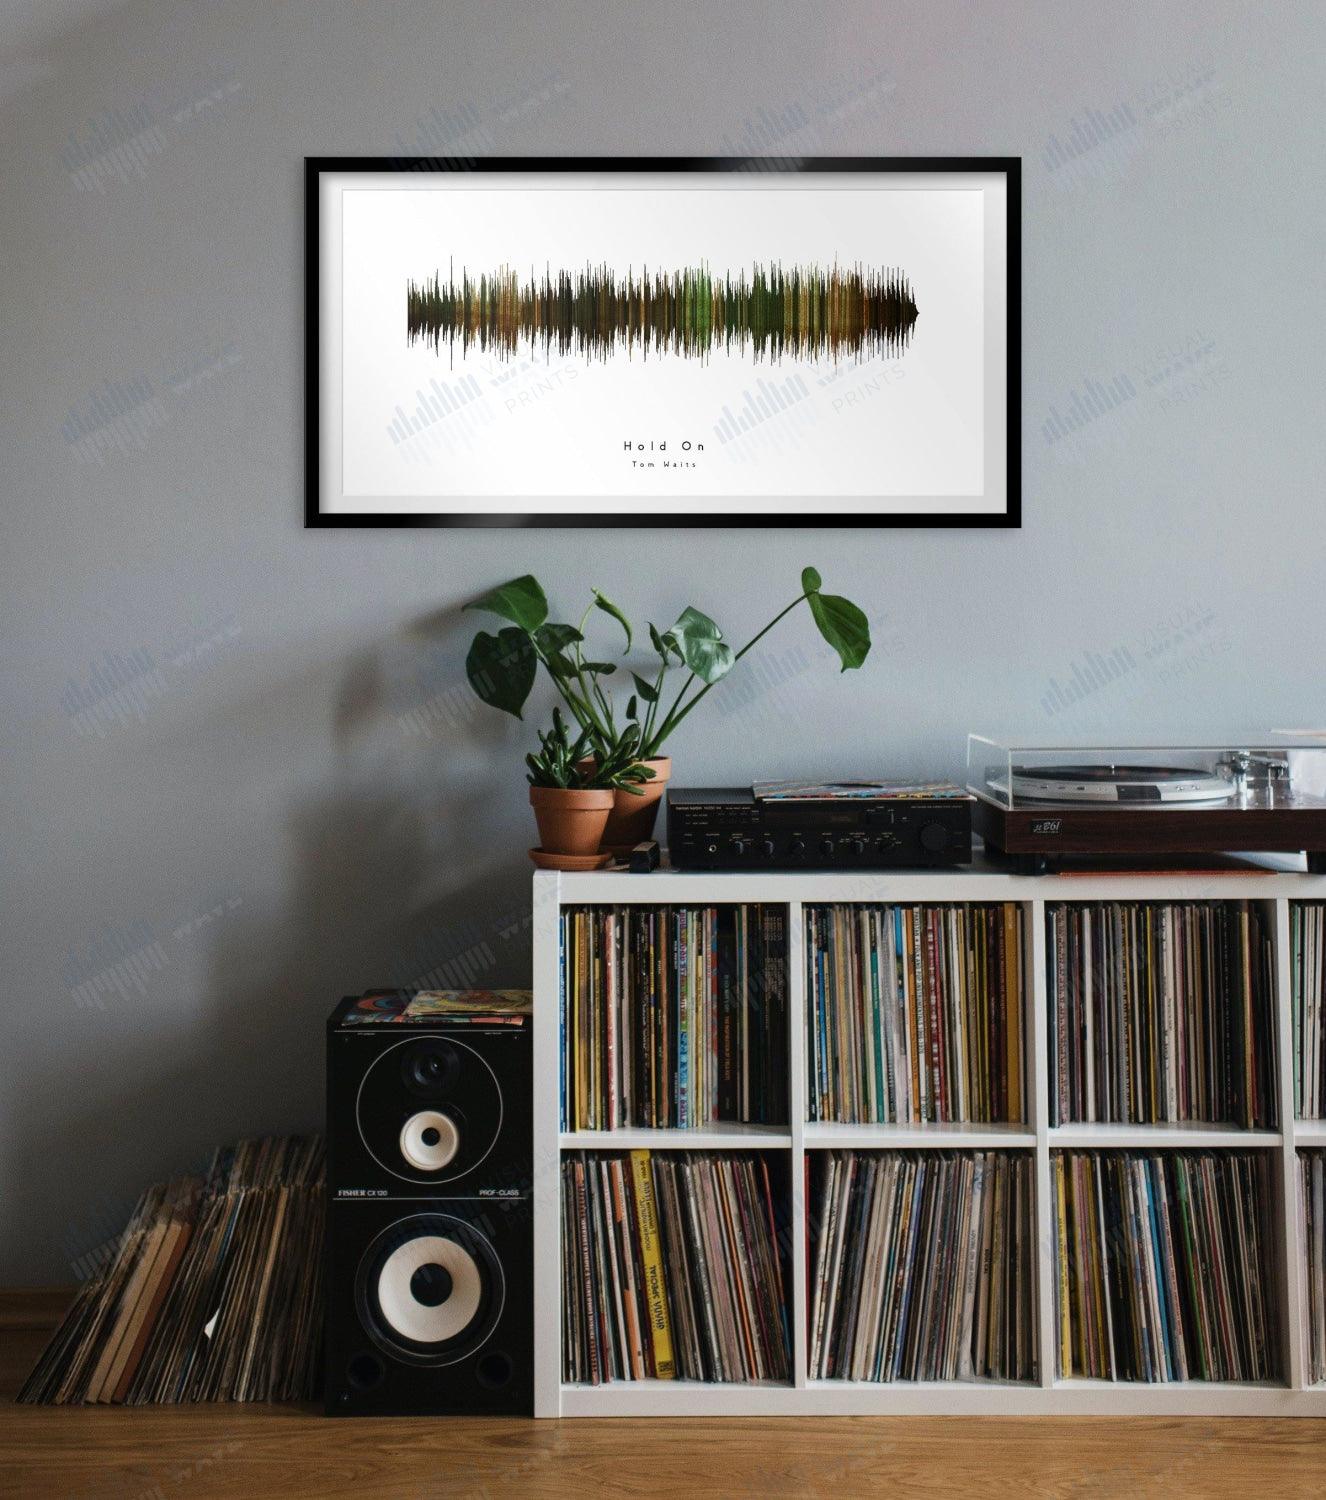 Hold On by Tom Waits - Visual Wave Prints